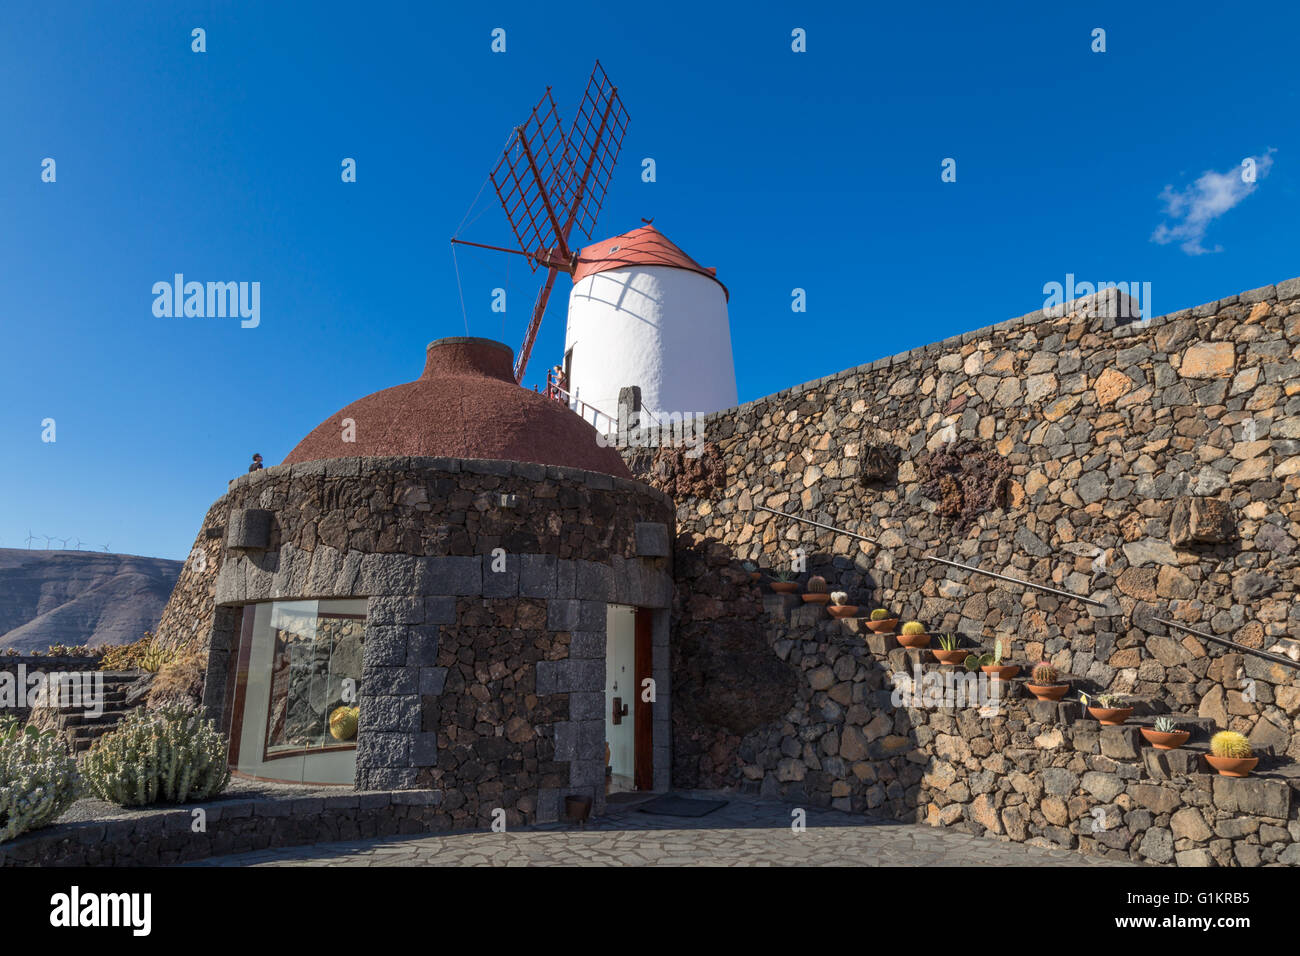 Entrance to the stairwell at the Lanzarote Cactus Garden, overlooked by a windmill. Designed by César Manrique. Stock Photo